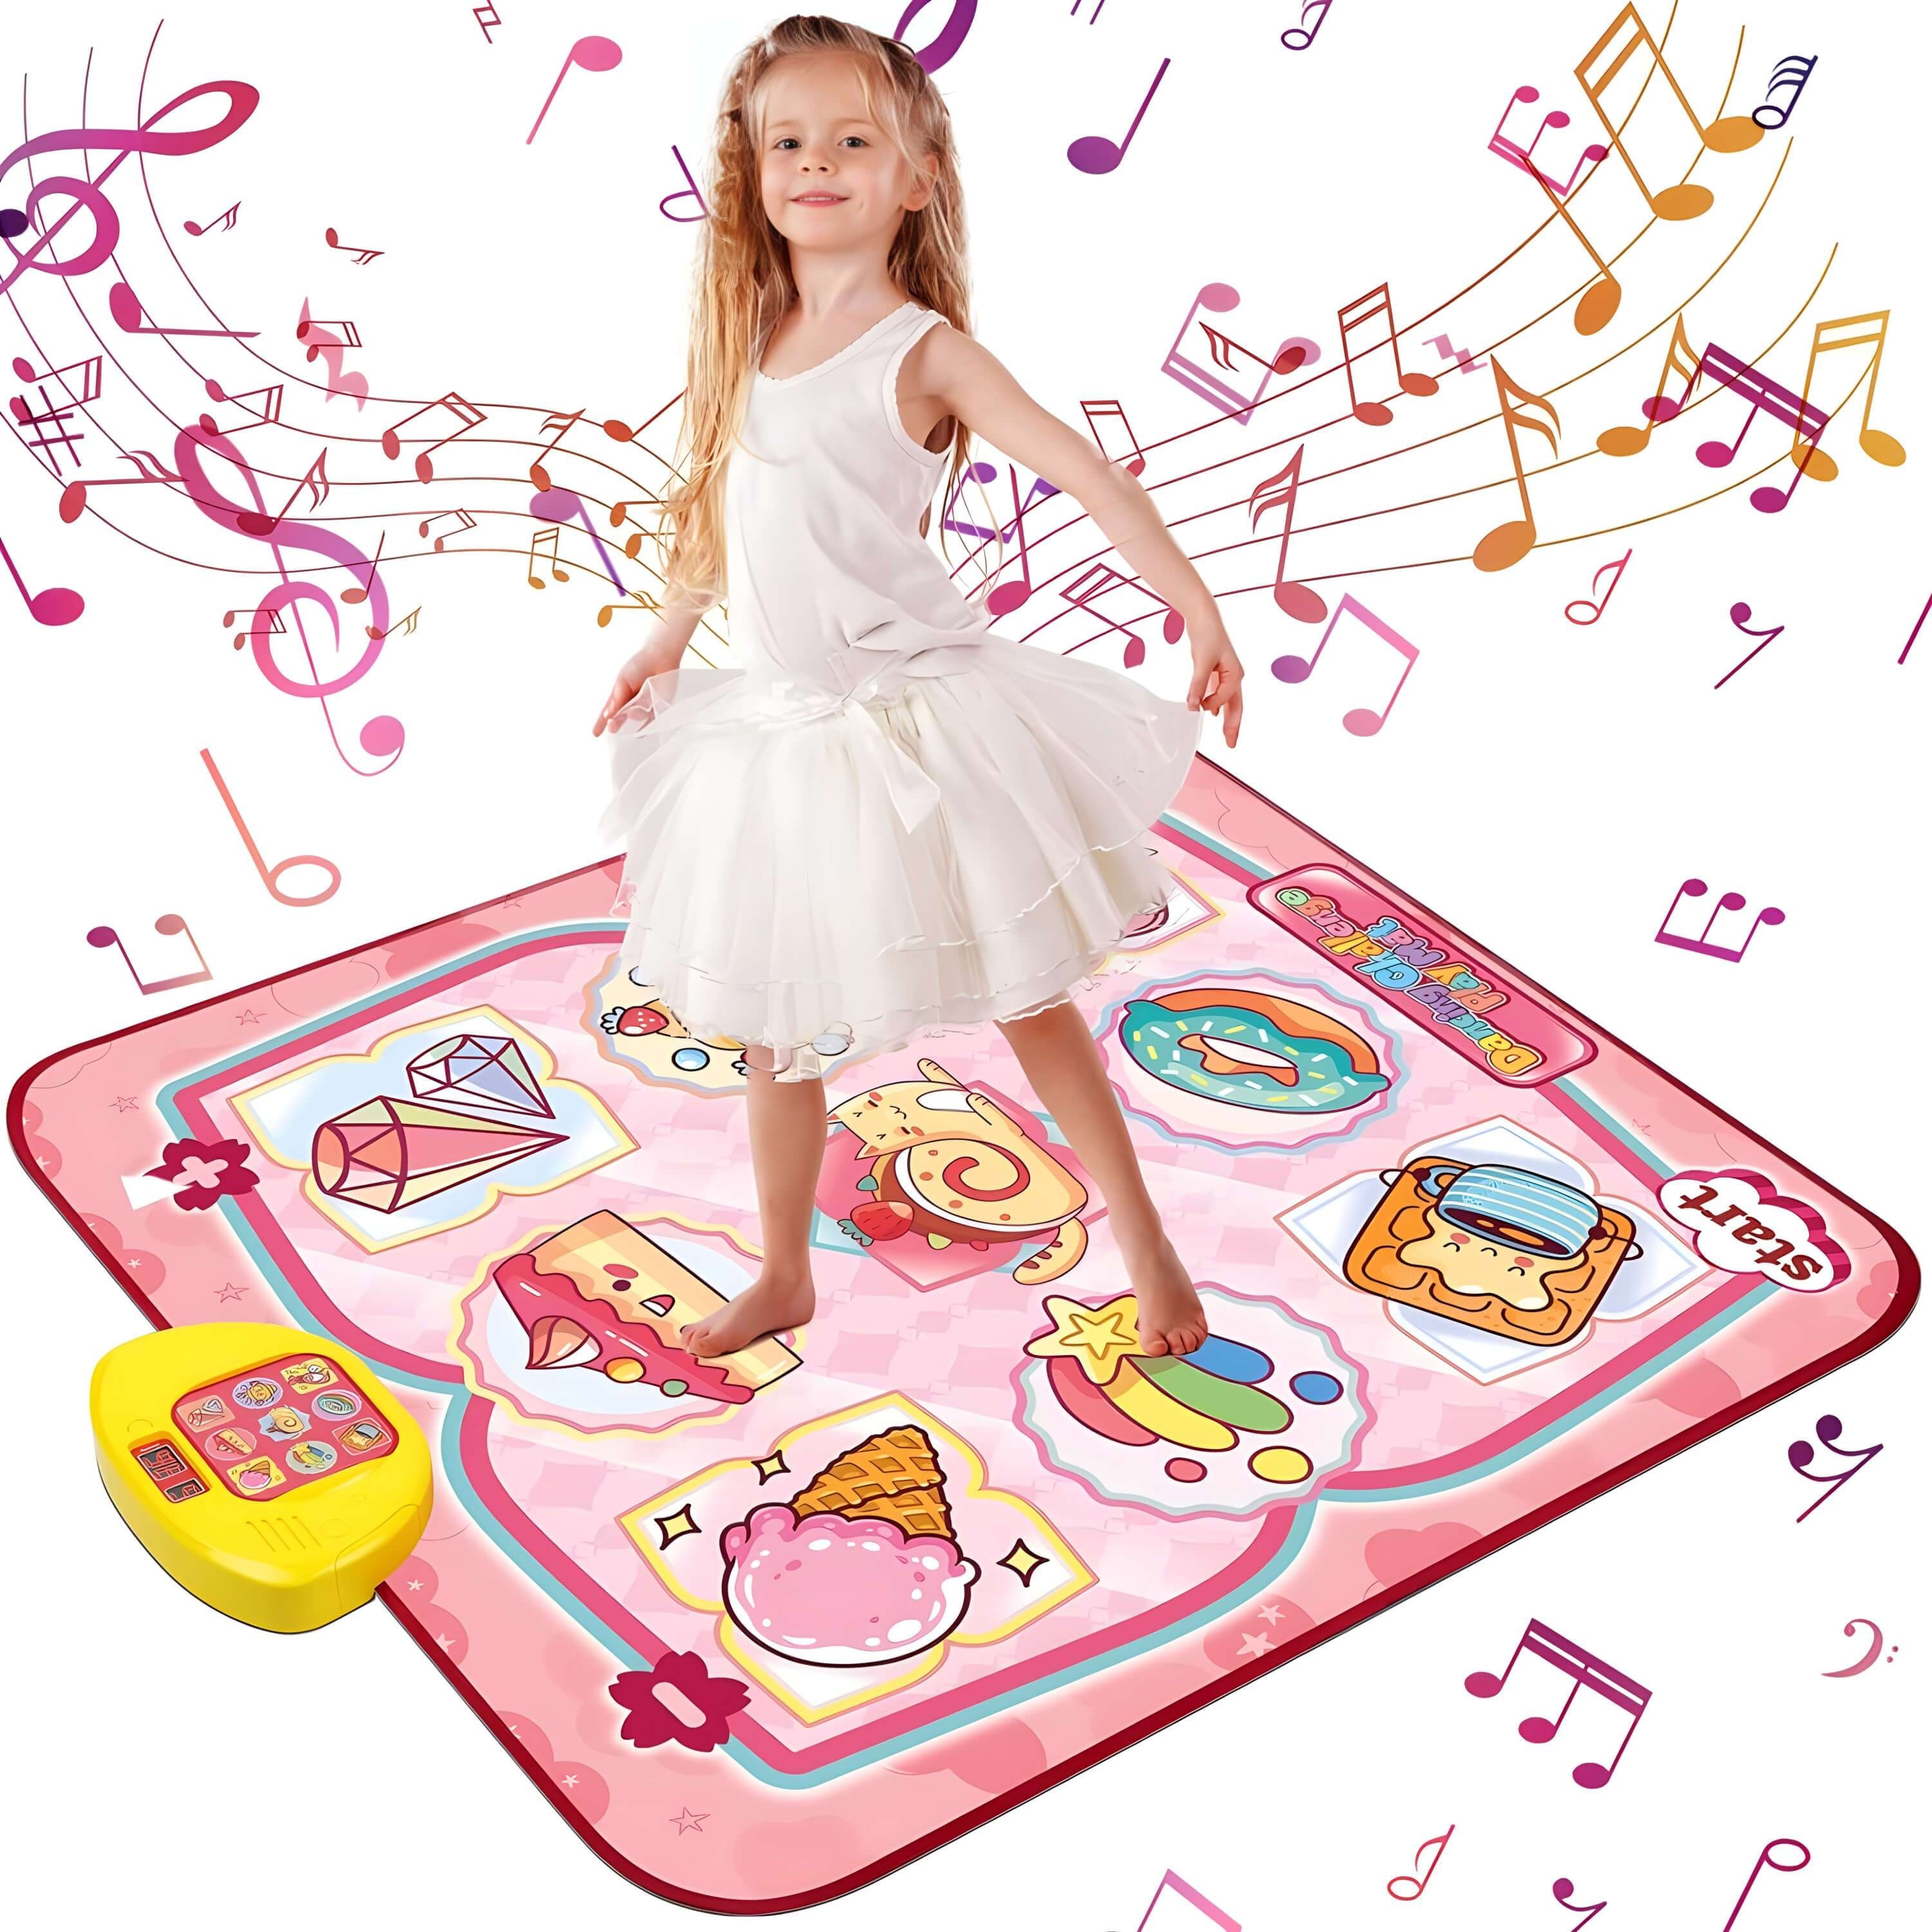 Tarmeek Dance Mat Games for Kids and Adult,Non-Slip Dancers Step yoga Pads  Sense Game Exercise & Fitness Dance Step Pad Game for PC,Single User  Dancing Mat,Birthday Christmas Gifts for Kids 